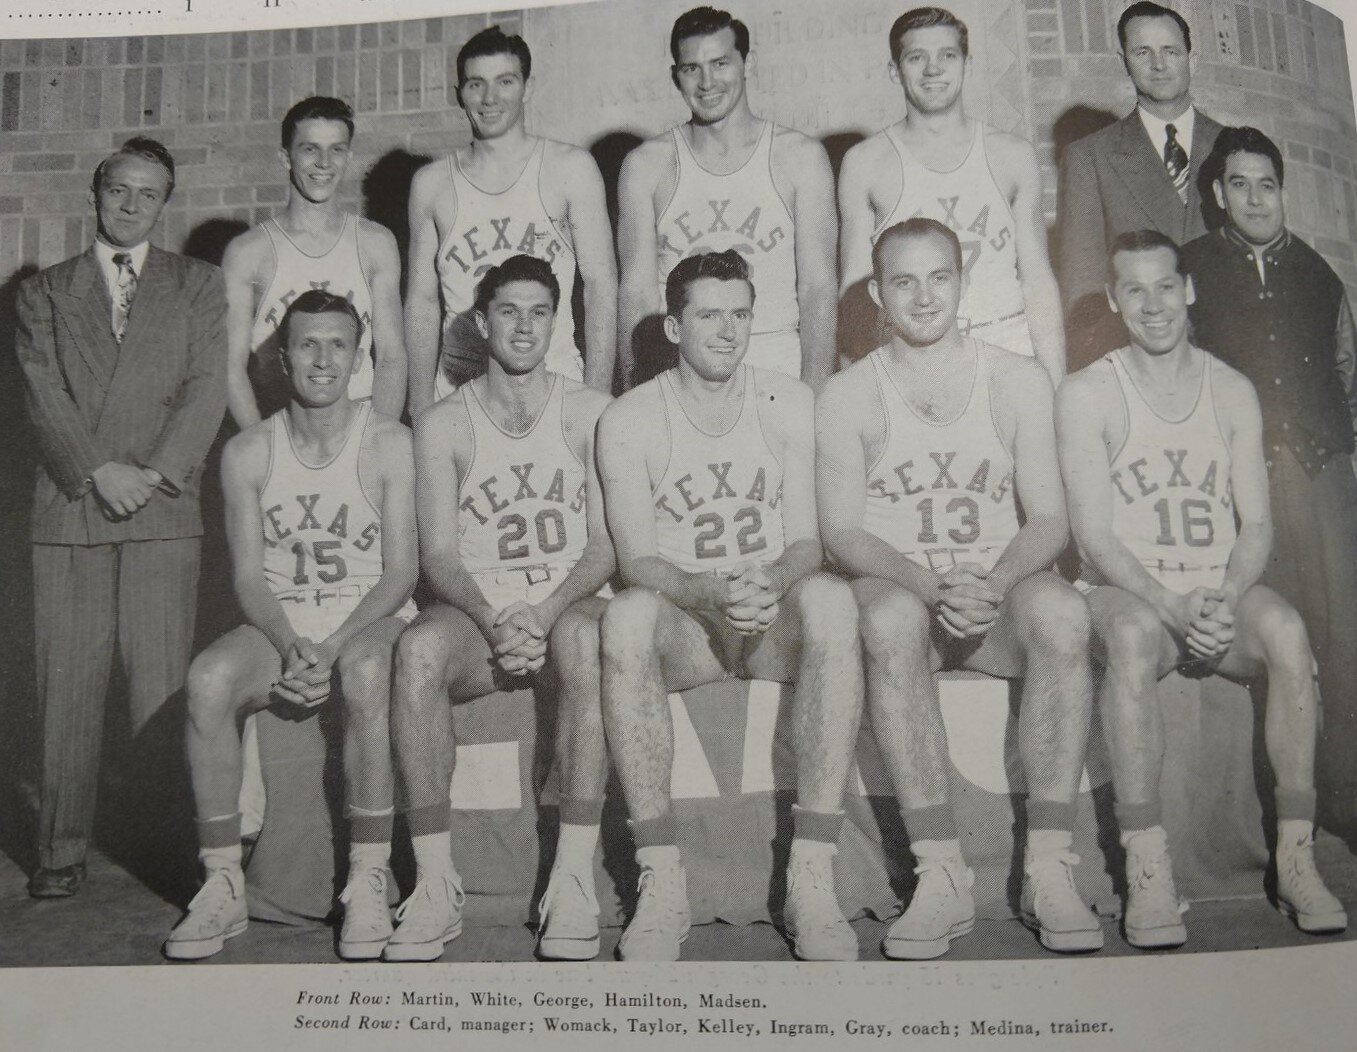 On this date in sports history: Oklahoma A&M defeats NYU for the